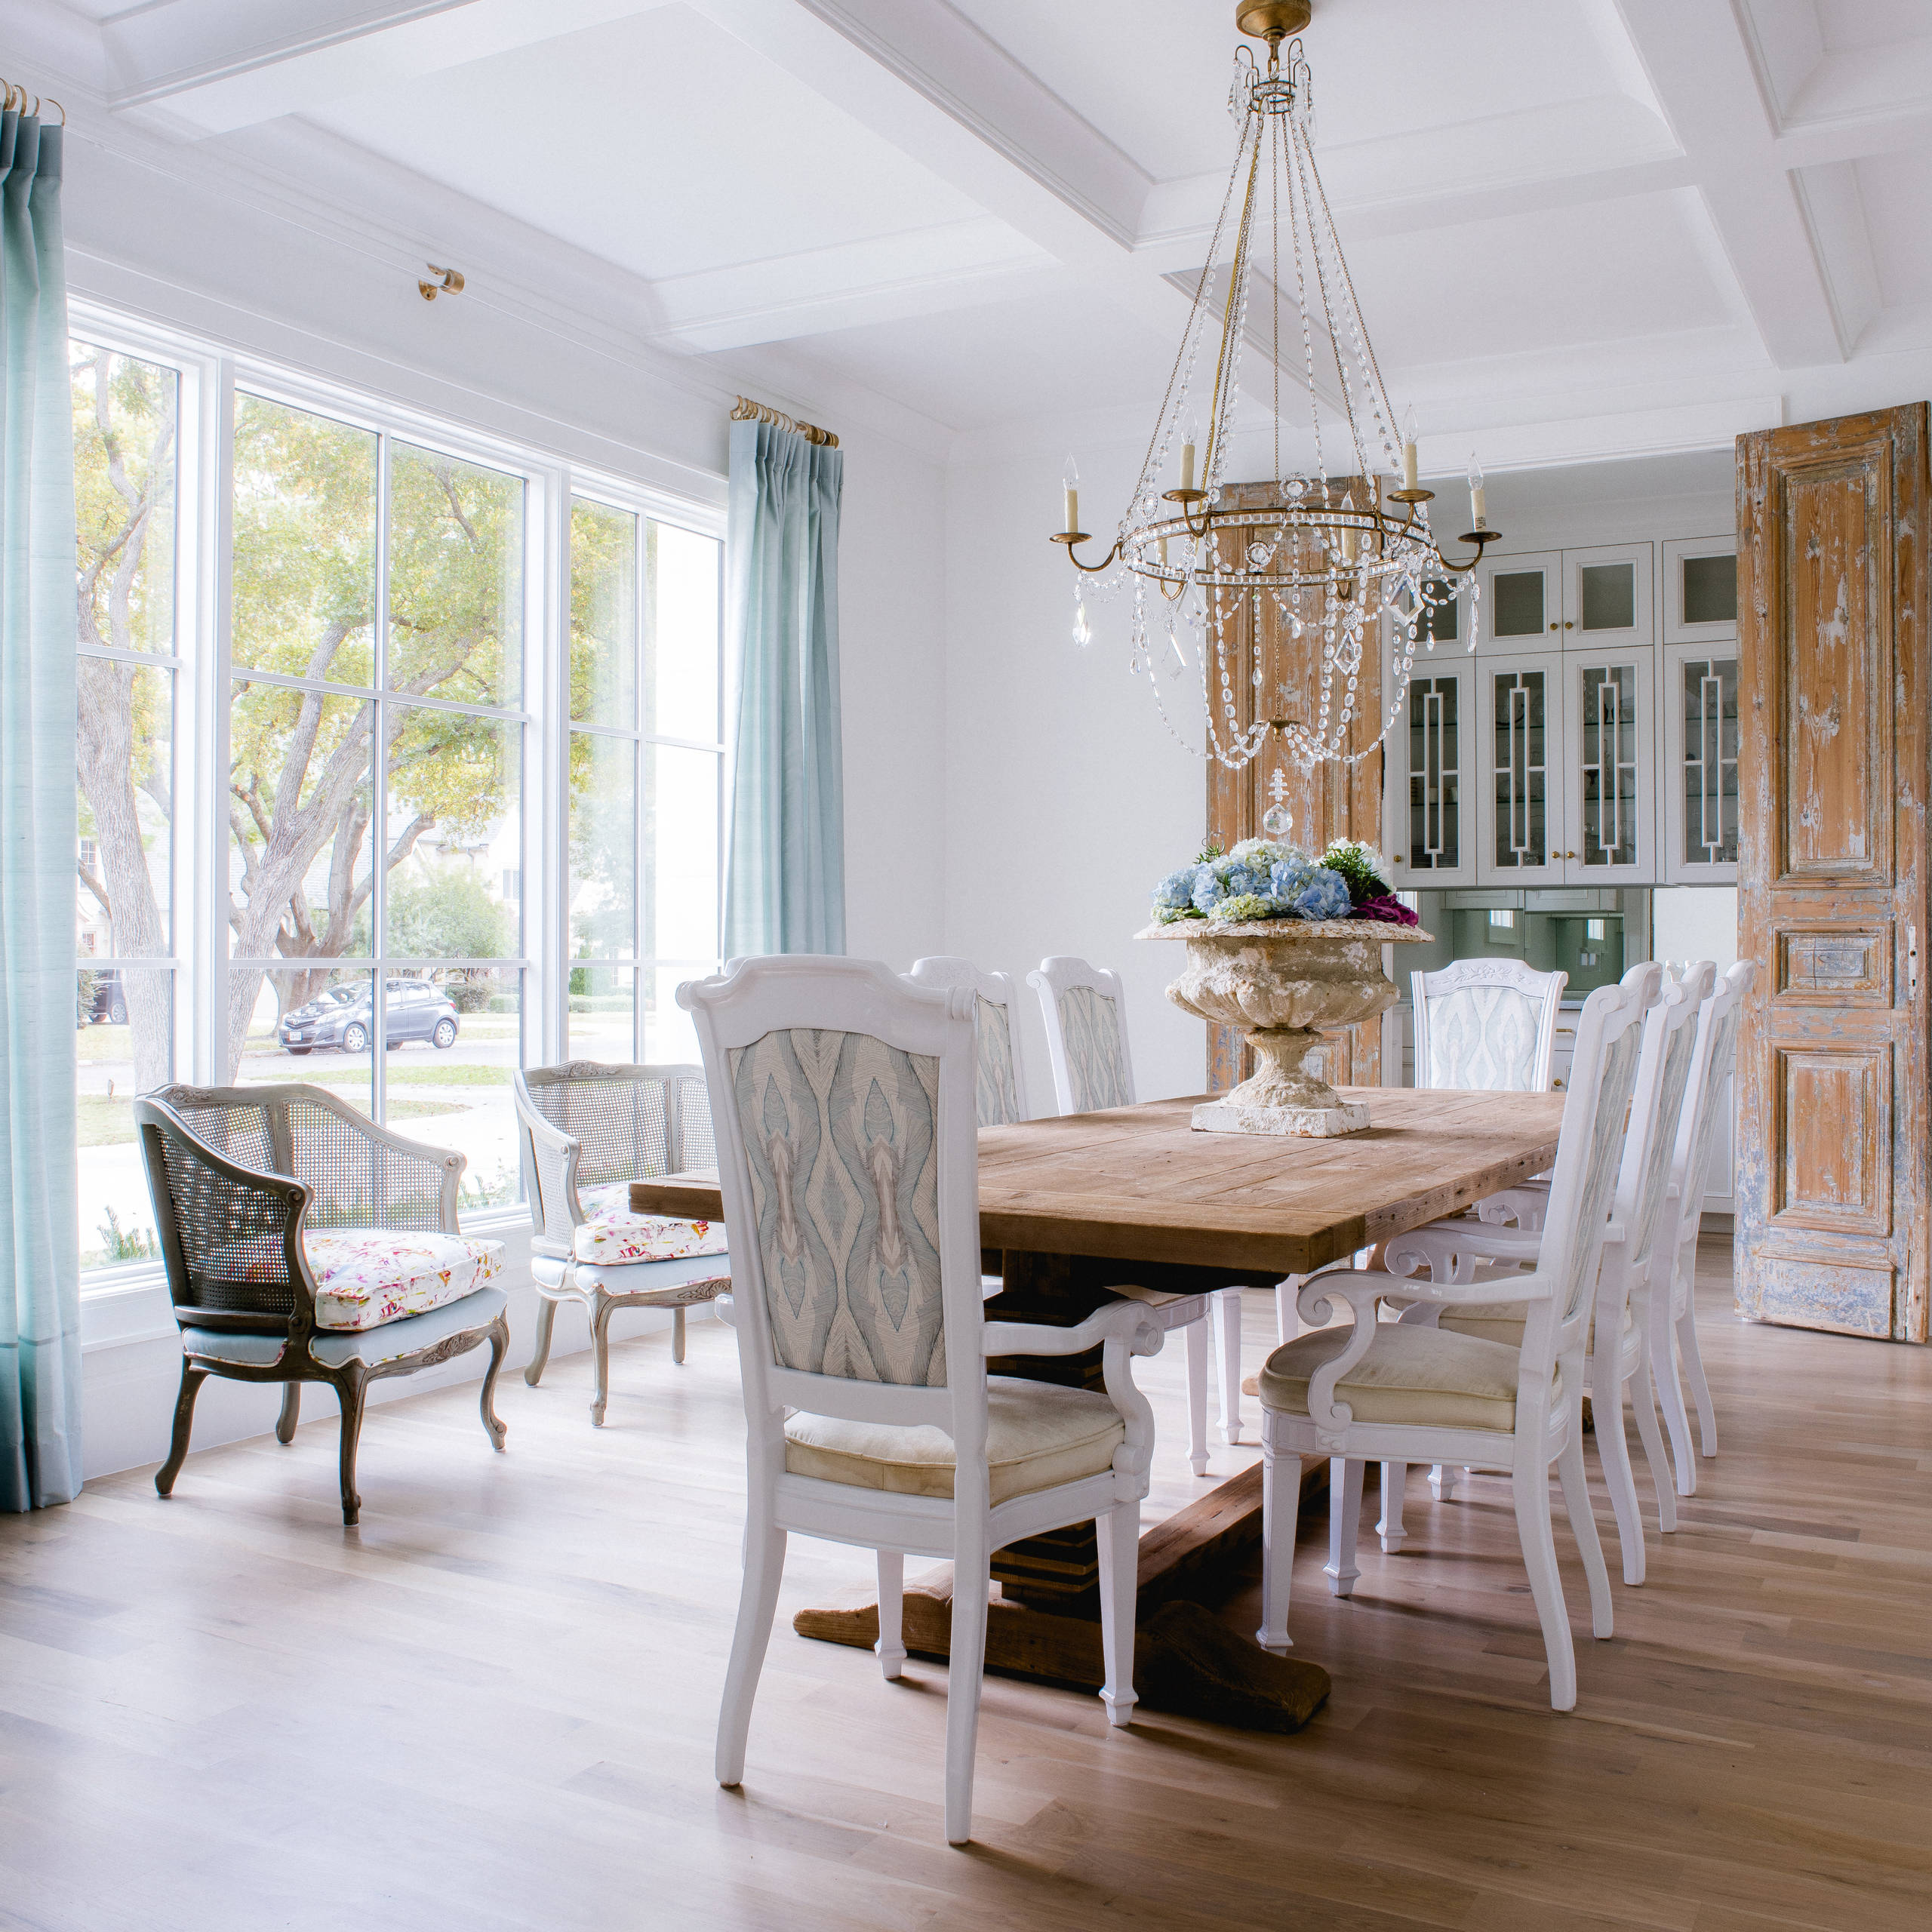 15 Cozy Shabby-Chic Dining Room Designs That Will Make An Impression
 Dining Room Design Pictures